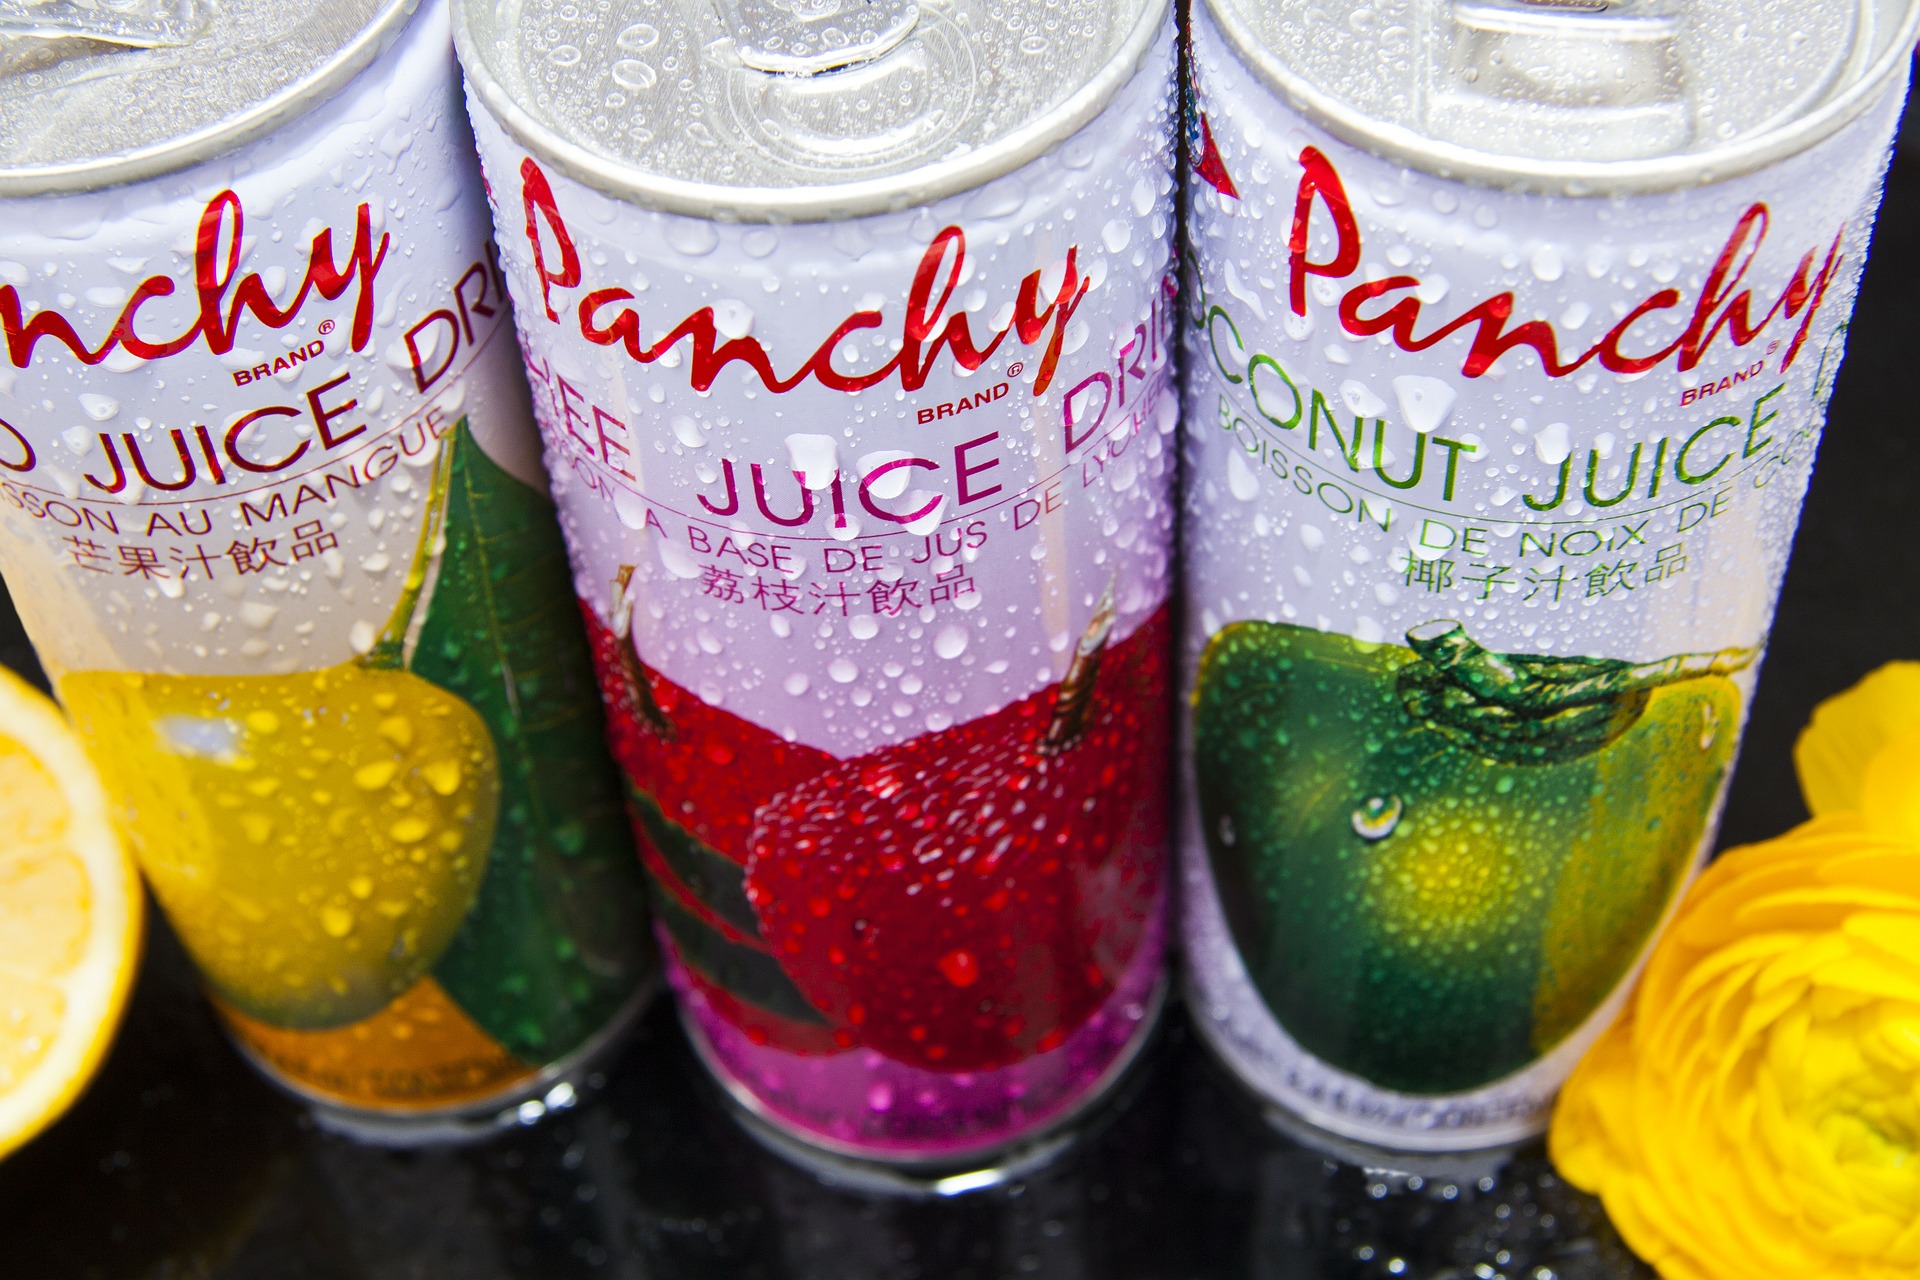 Panchy Juice Drink - New Food Labeling Regulations Example